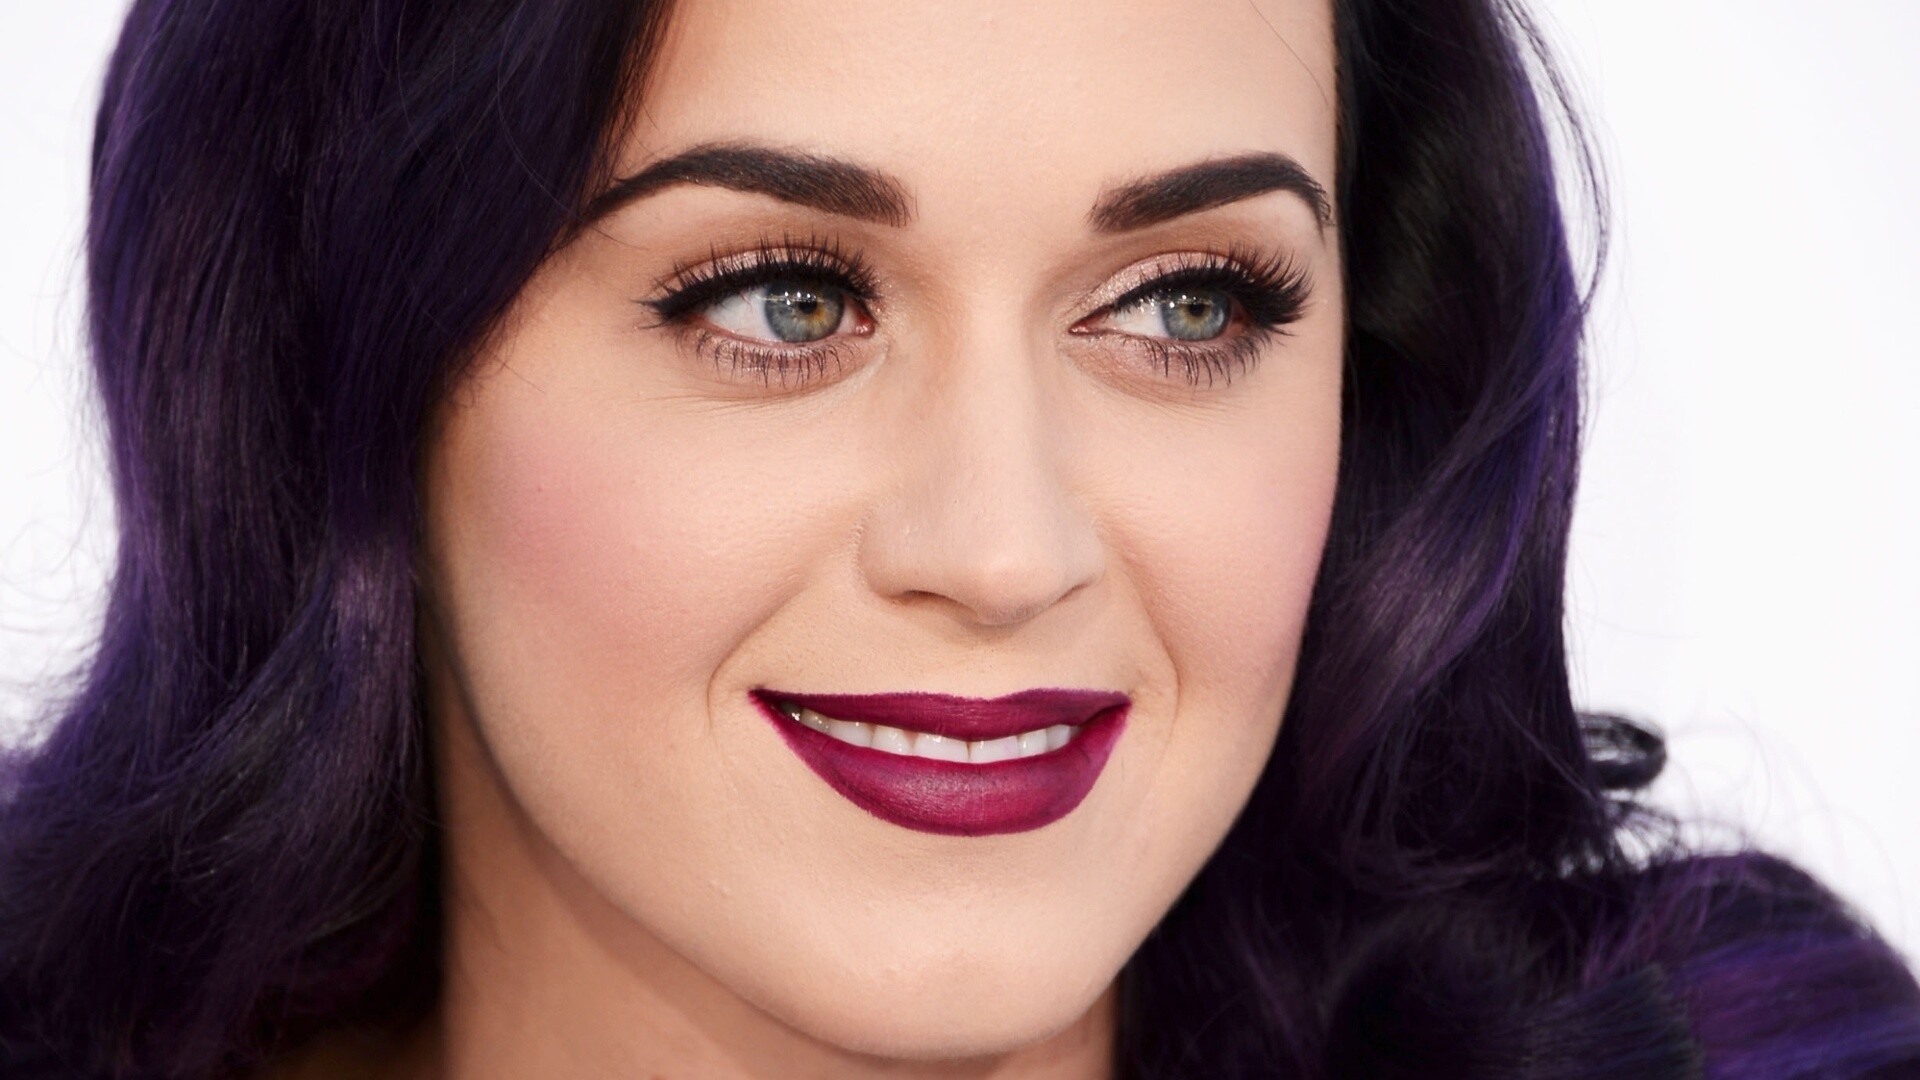 Katy Perry: Musician, Voiced Smurfette in The Smurfs film series. 1920x1080 Full HD Background.